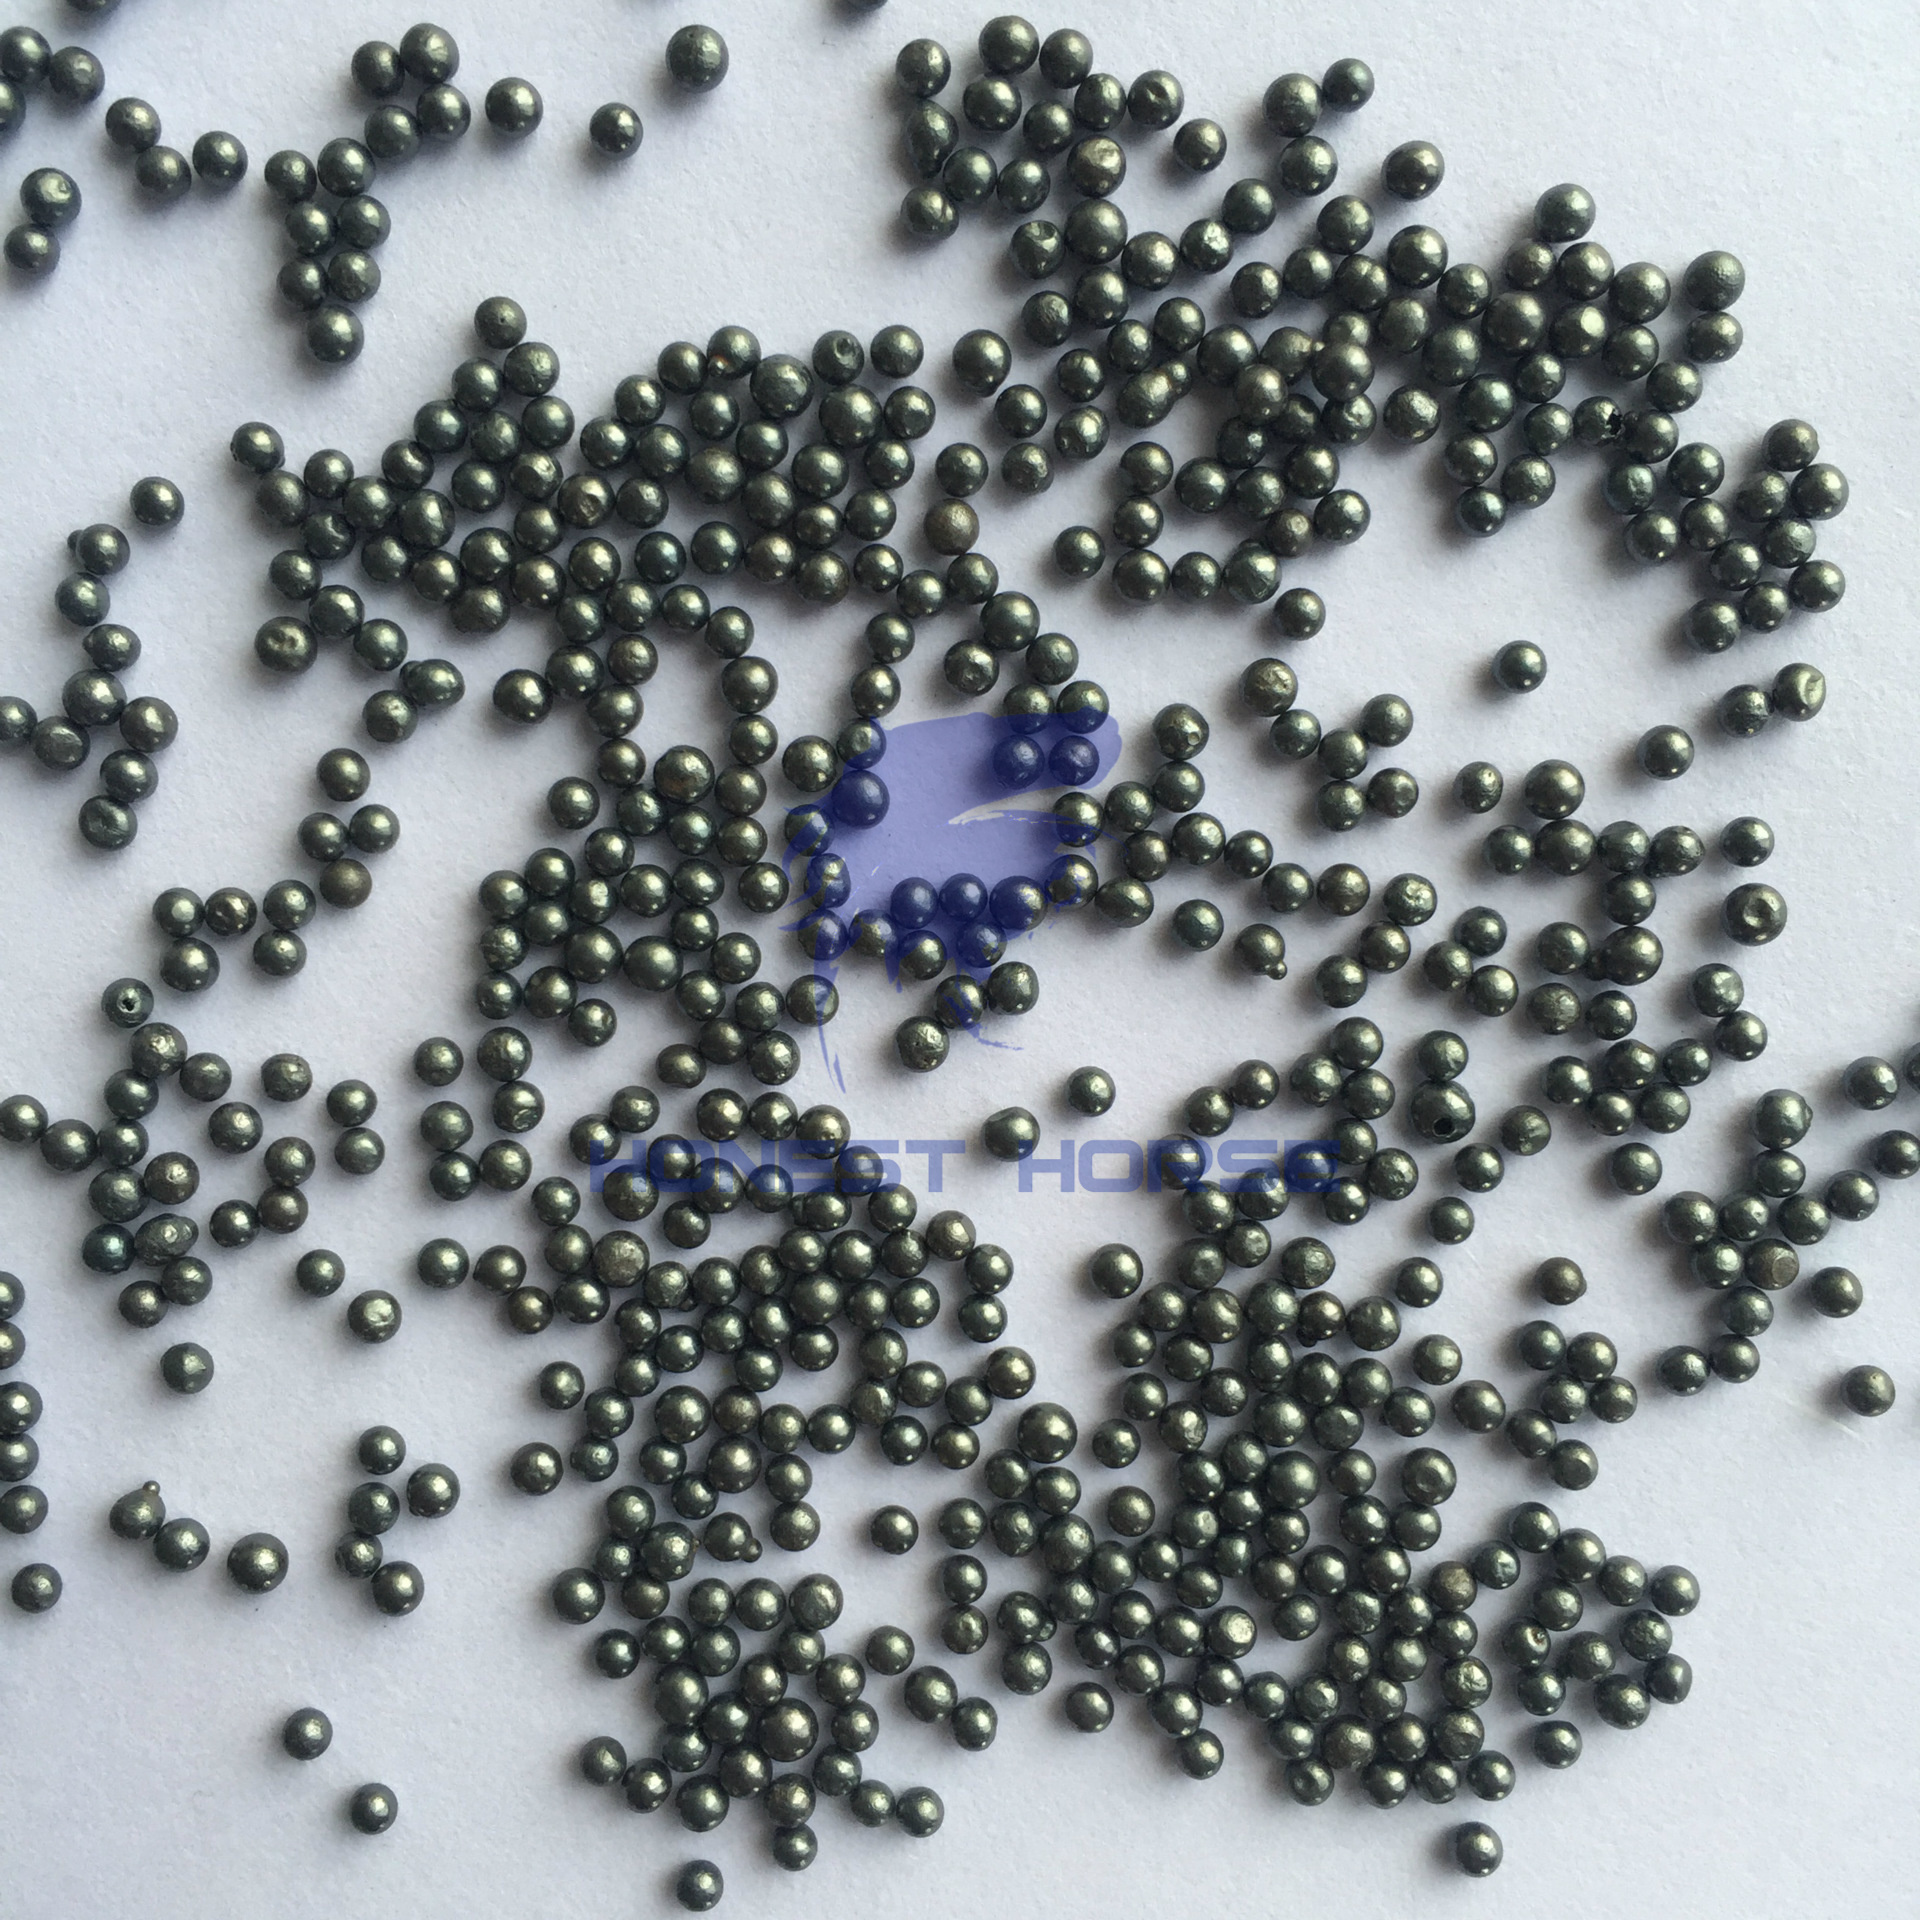 Selection of steel shot - particle size